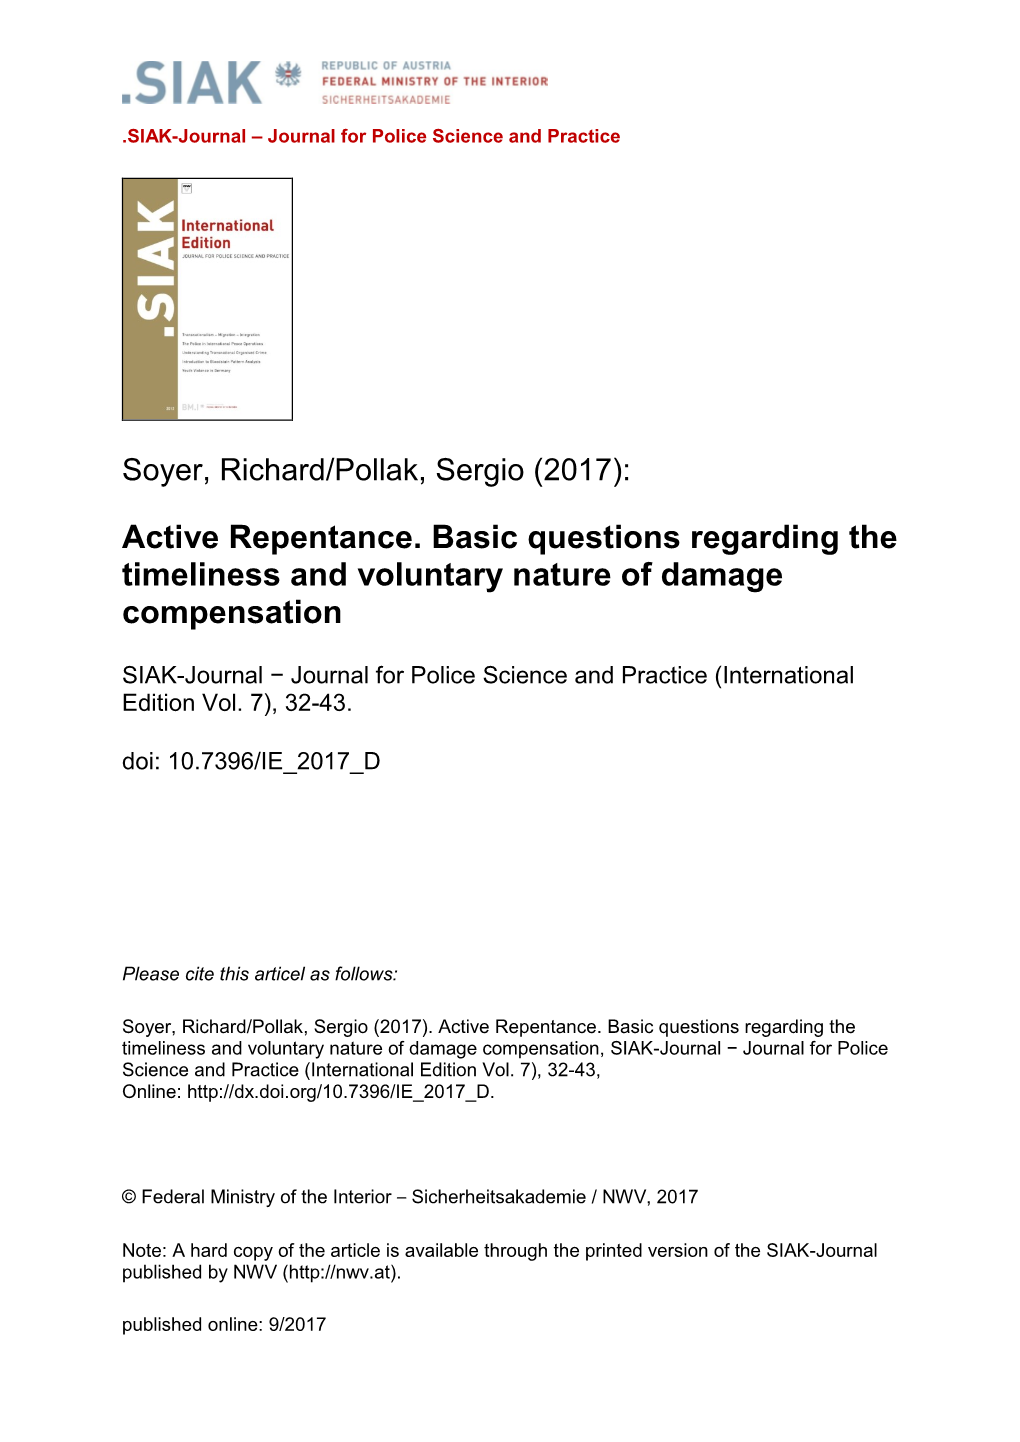 Active Repentance. Basic Questions Regarding the Timeliness and Voluntary Nature of Damage Compensation